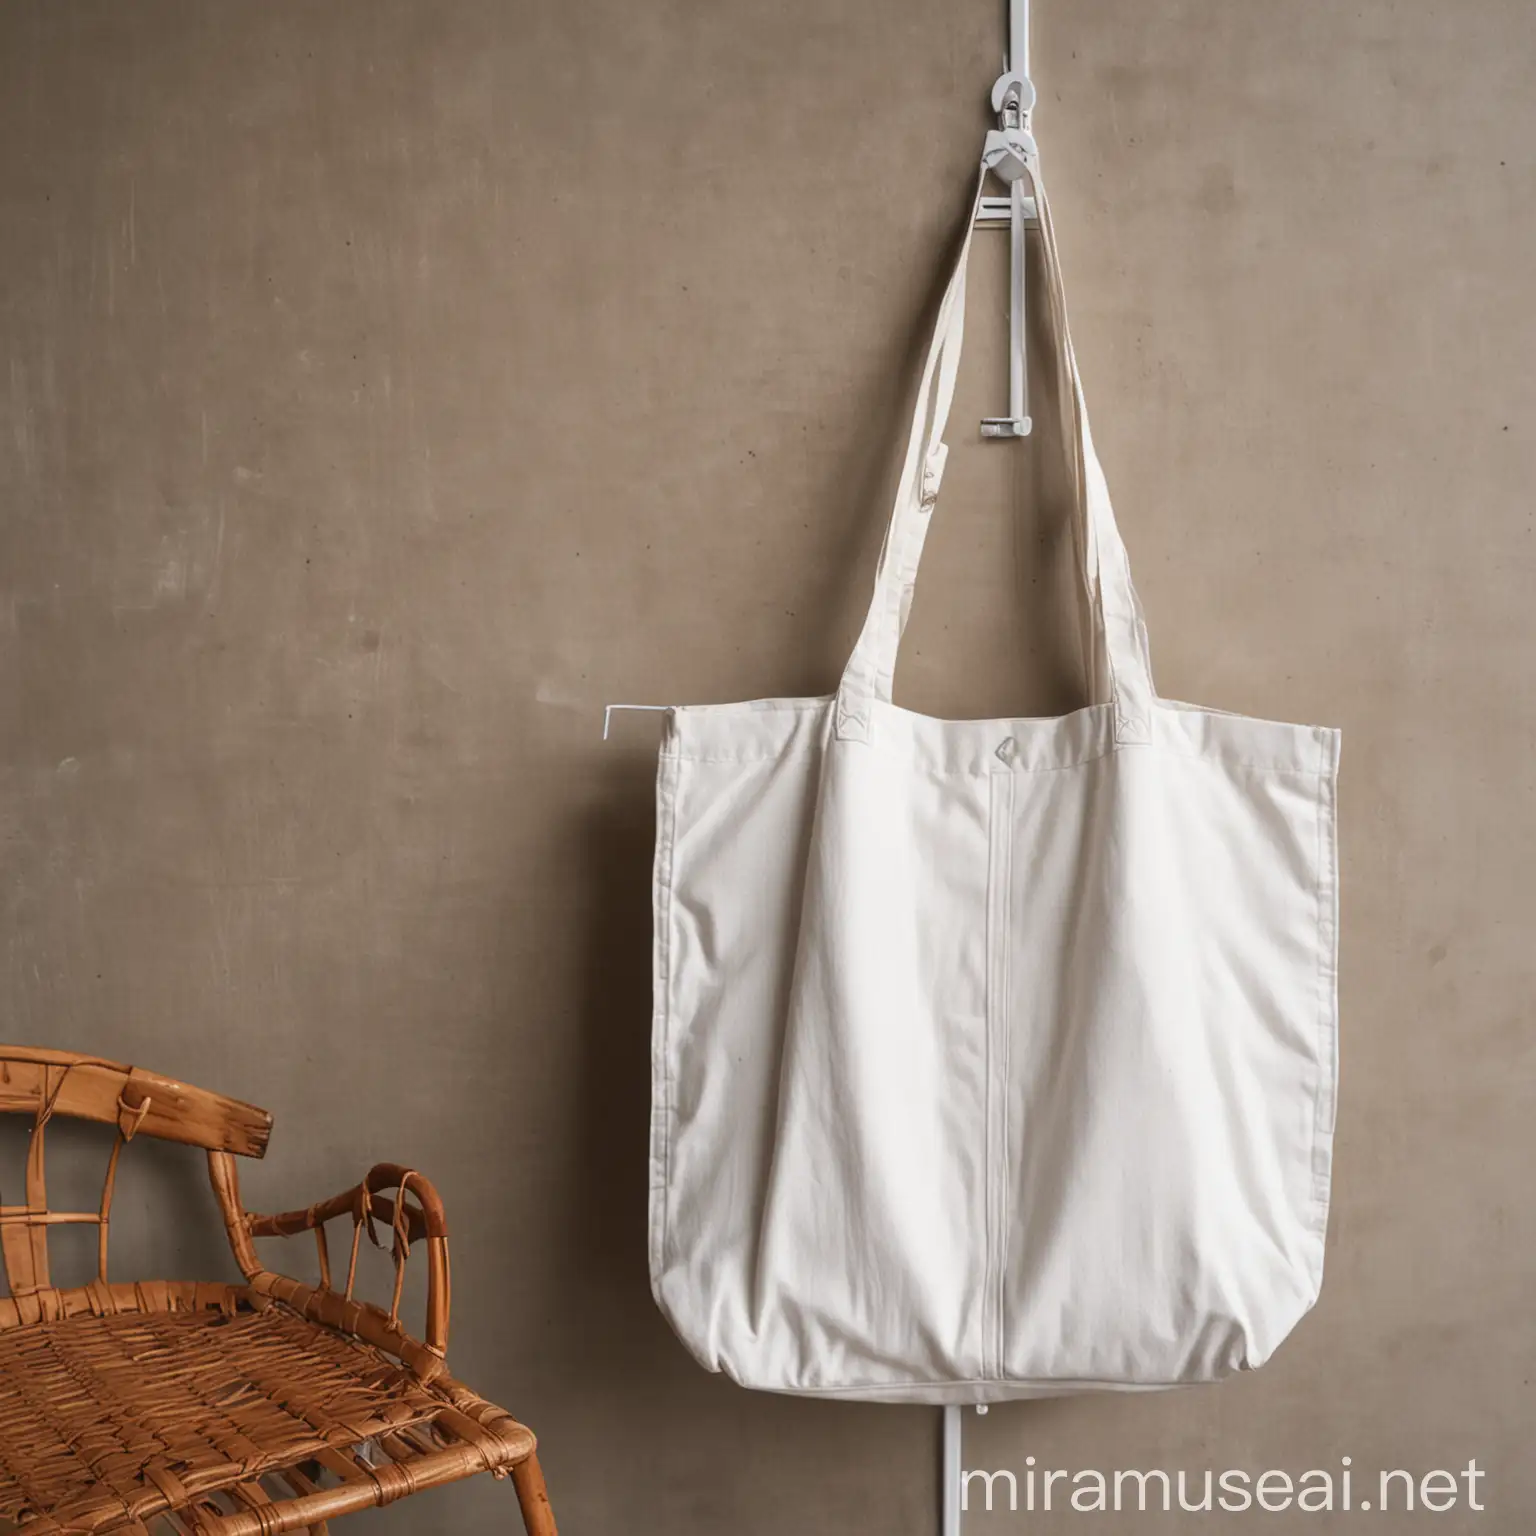 a white tote bag hanging from a clothes hanger in a cafe